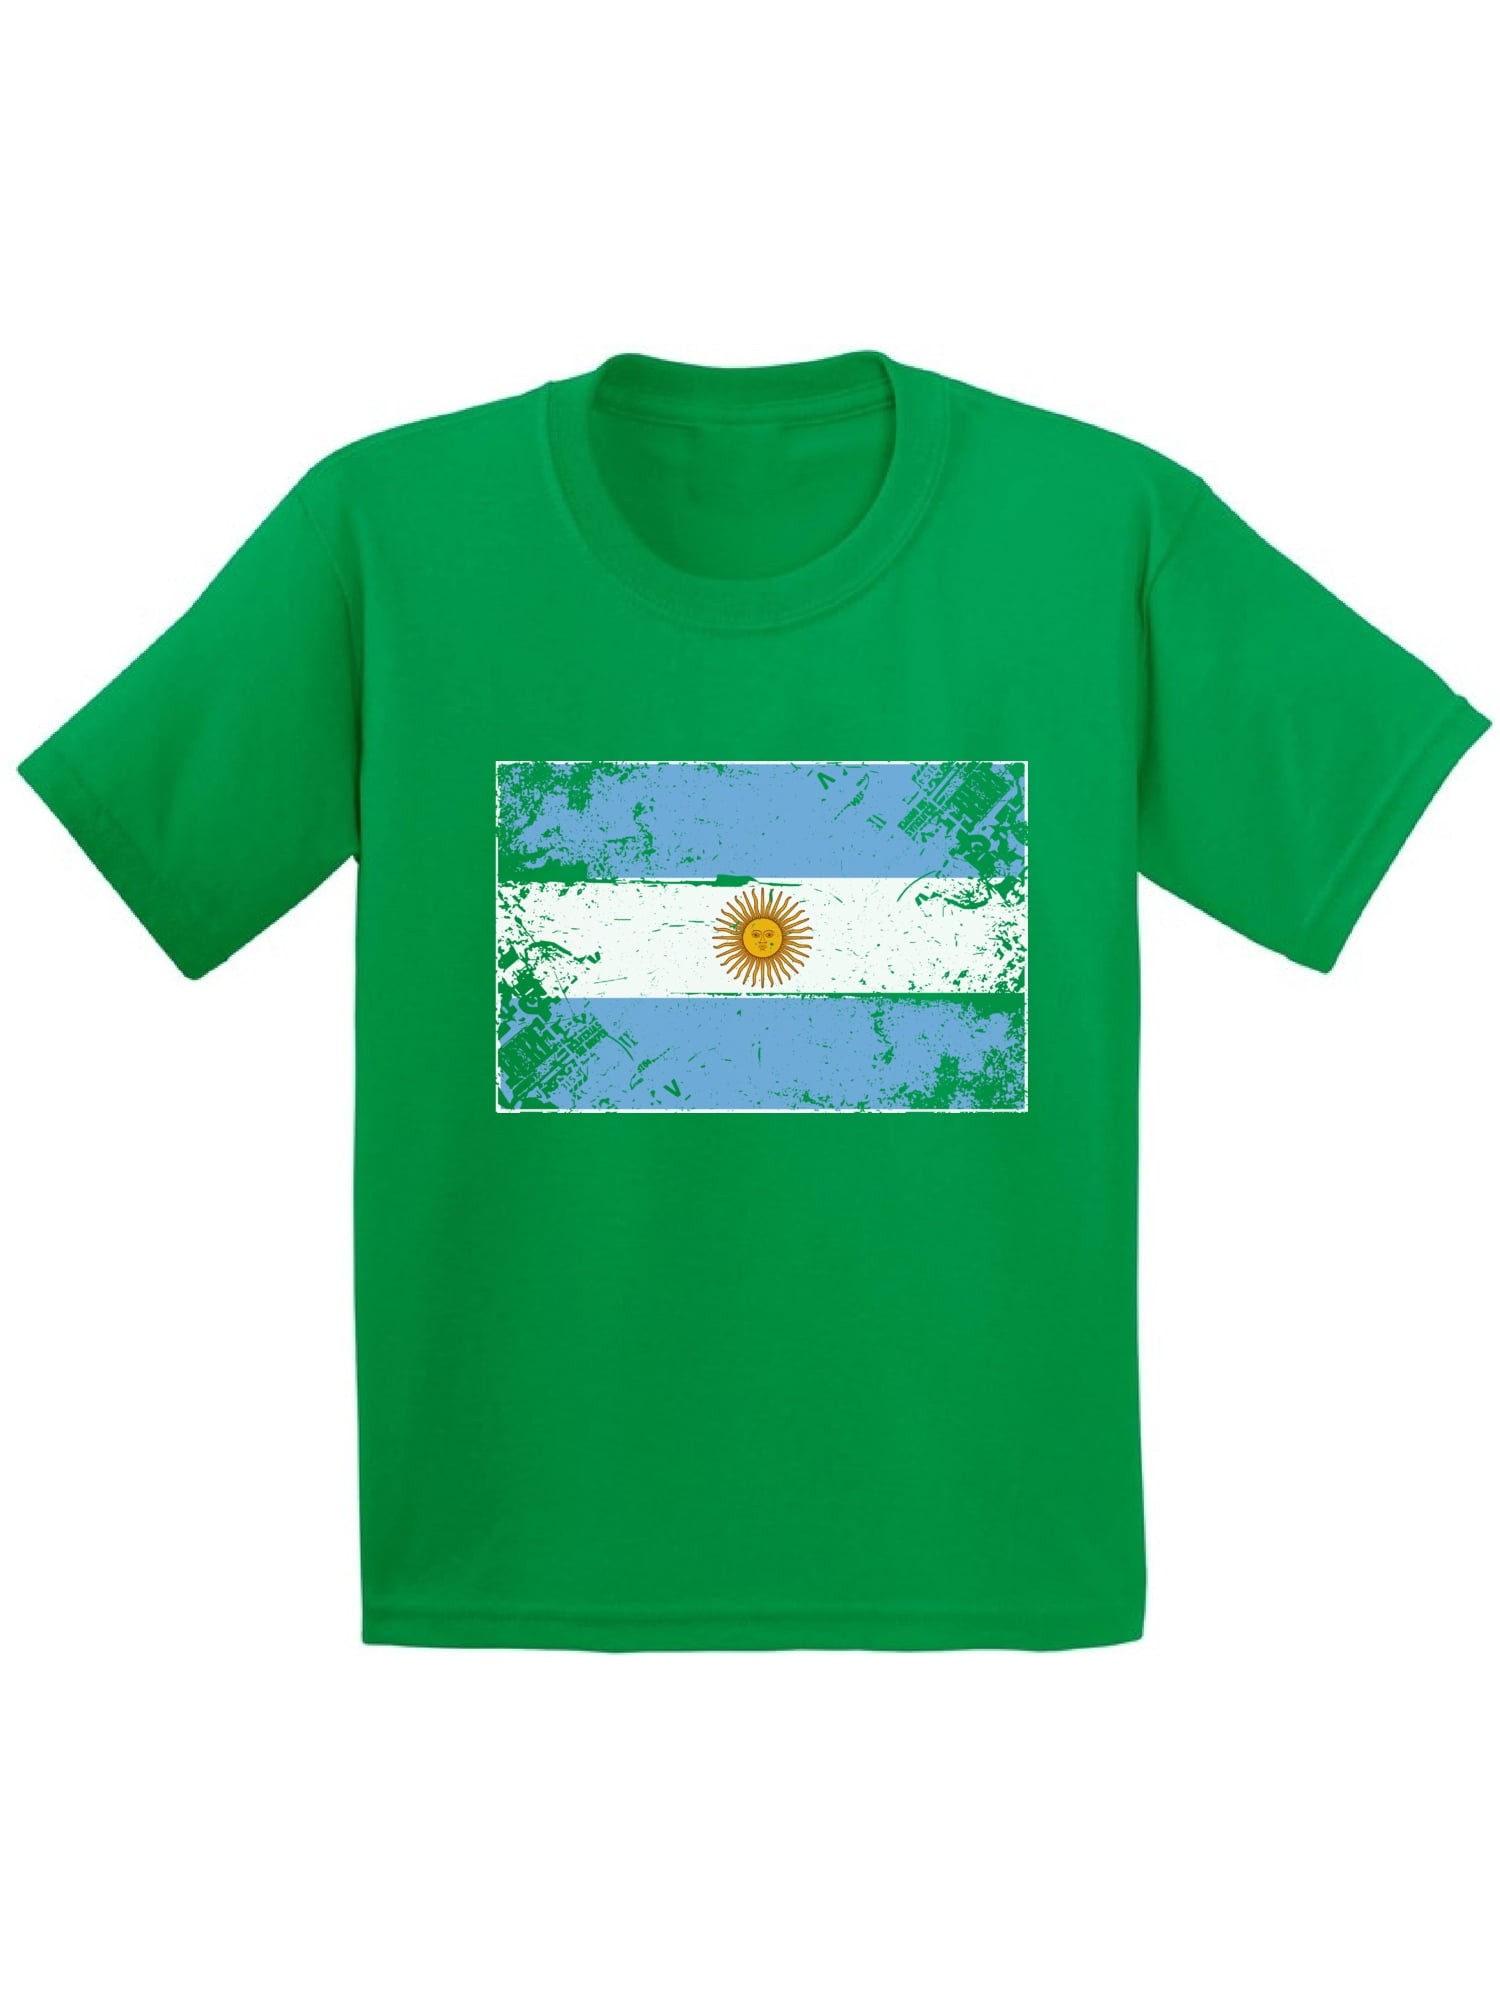 Argentina Top Argentinian Flag Gifts Women Ladies Teen -  Portugal